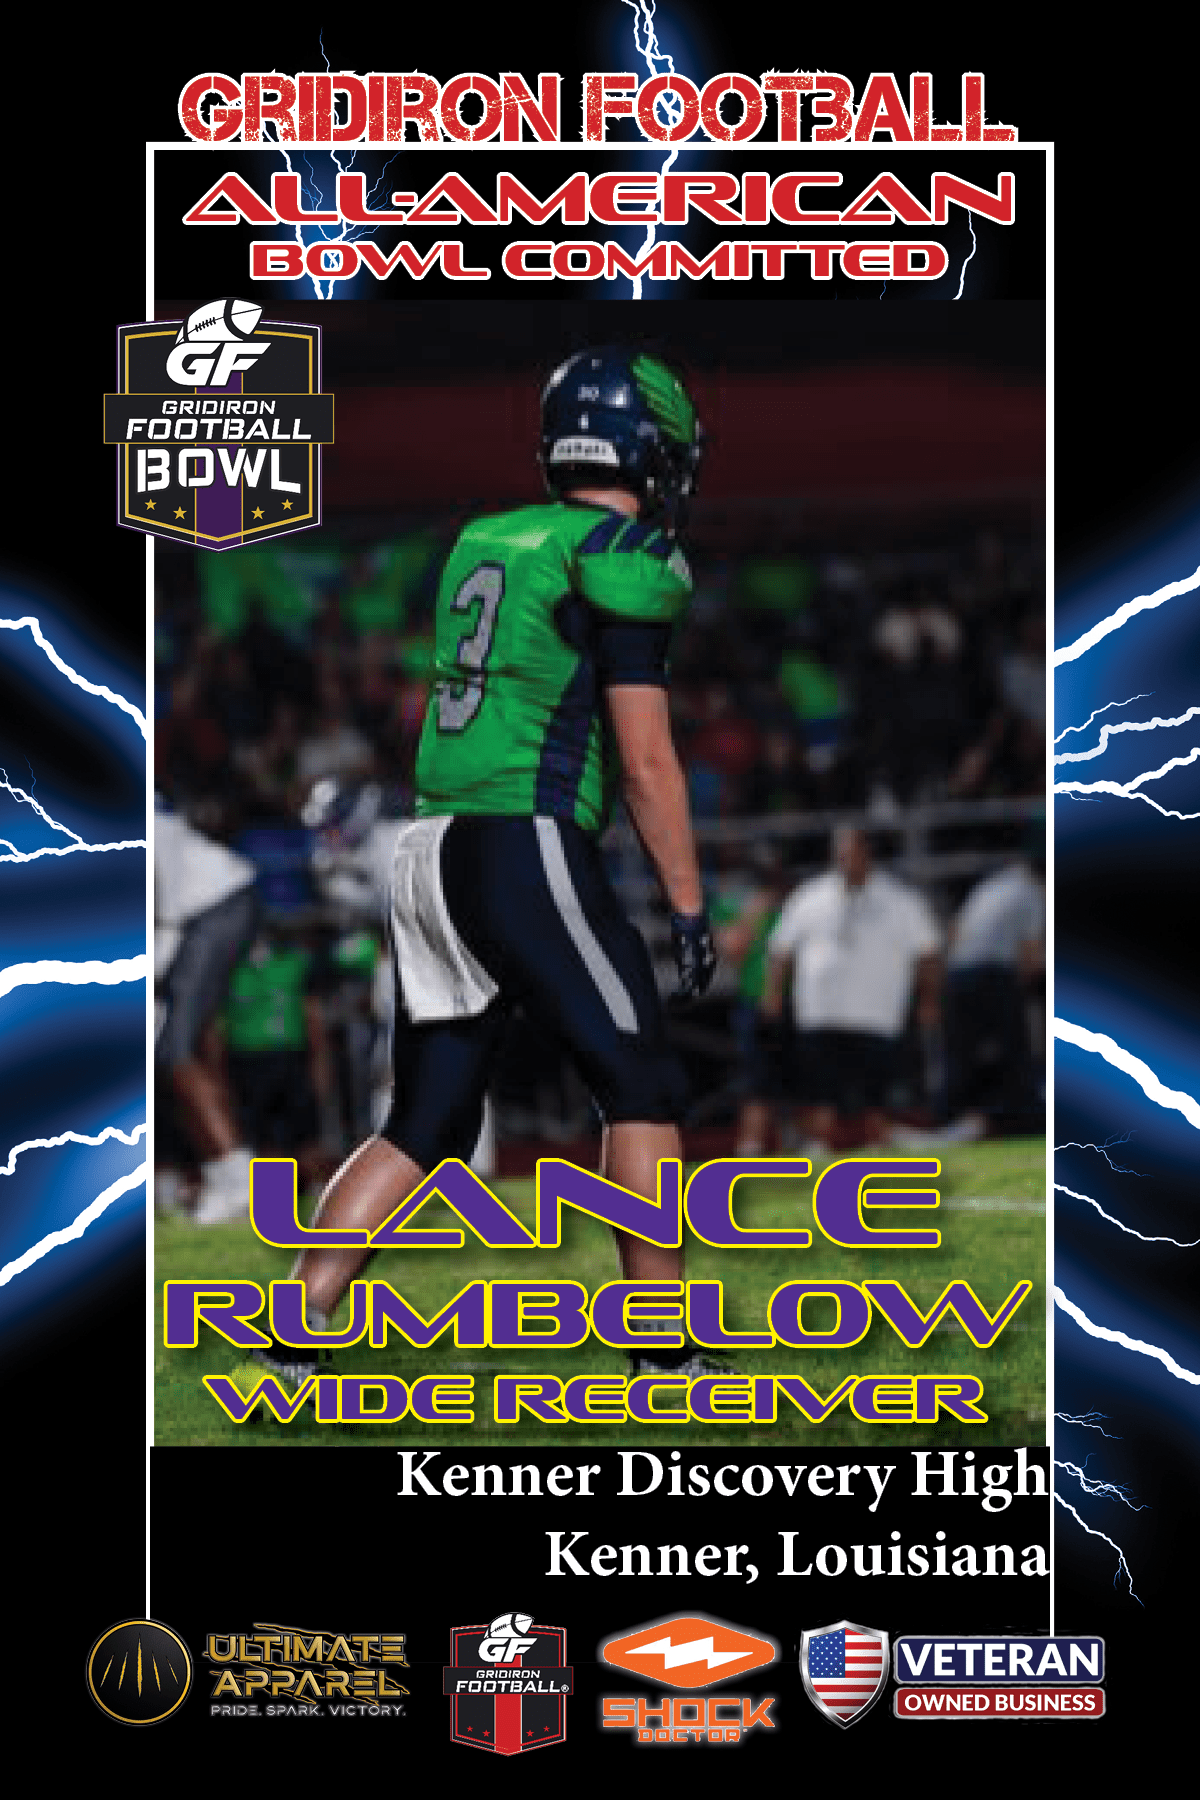 BREAKING NEWS: Kenner Discovery High School (Kenner, LA) WR Lance Rumbelow Commits To The Gridiron Football All-American Bowl Game